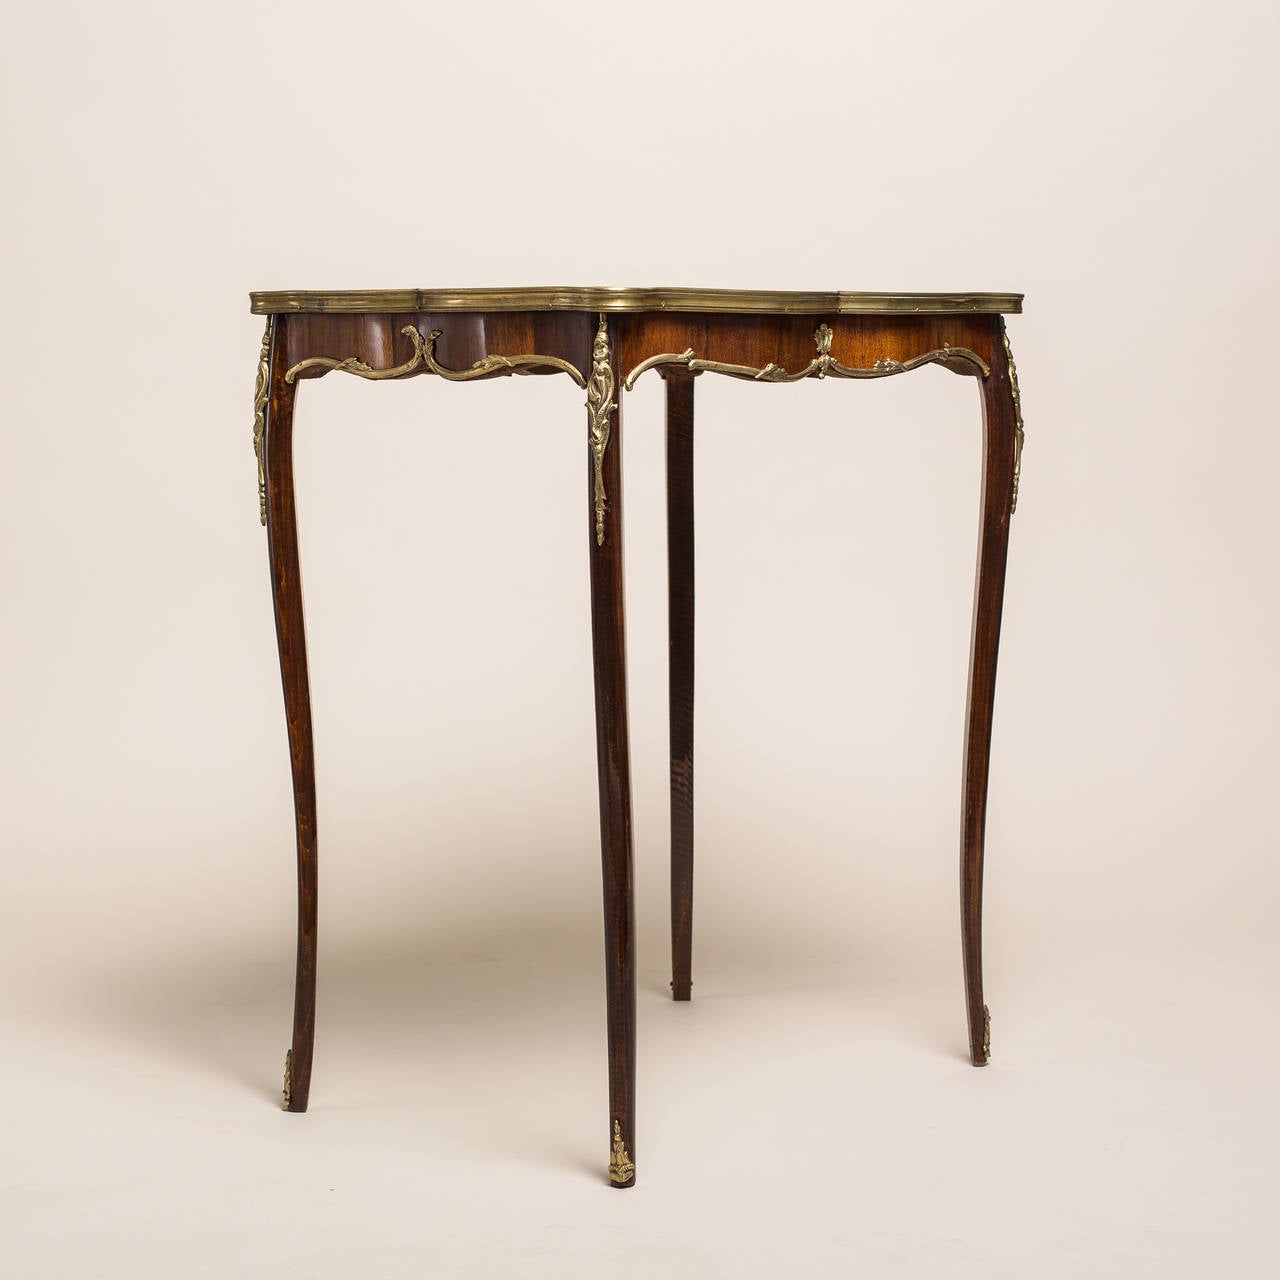 This petite amazing French Side Table comes out of the Napoleon III period, circa 1890. It leaves a lasting impression with its many delicate and superbly processed details. The top of the table has maple thread inlays decorating a rosewood or